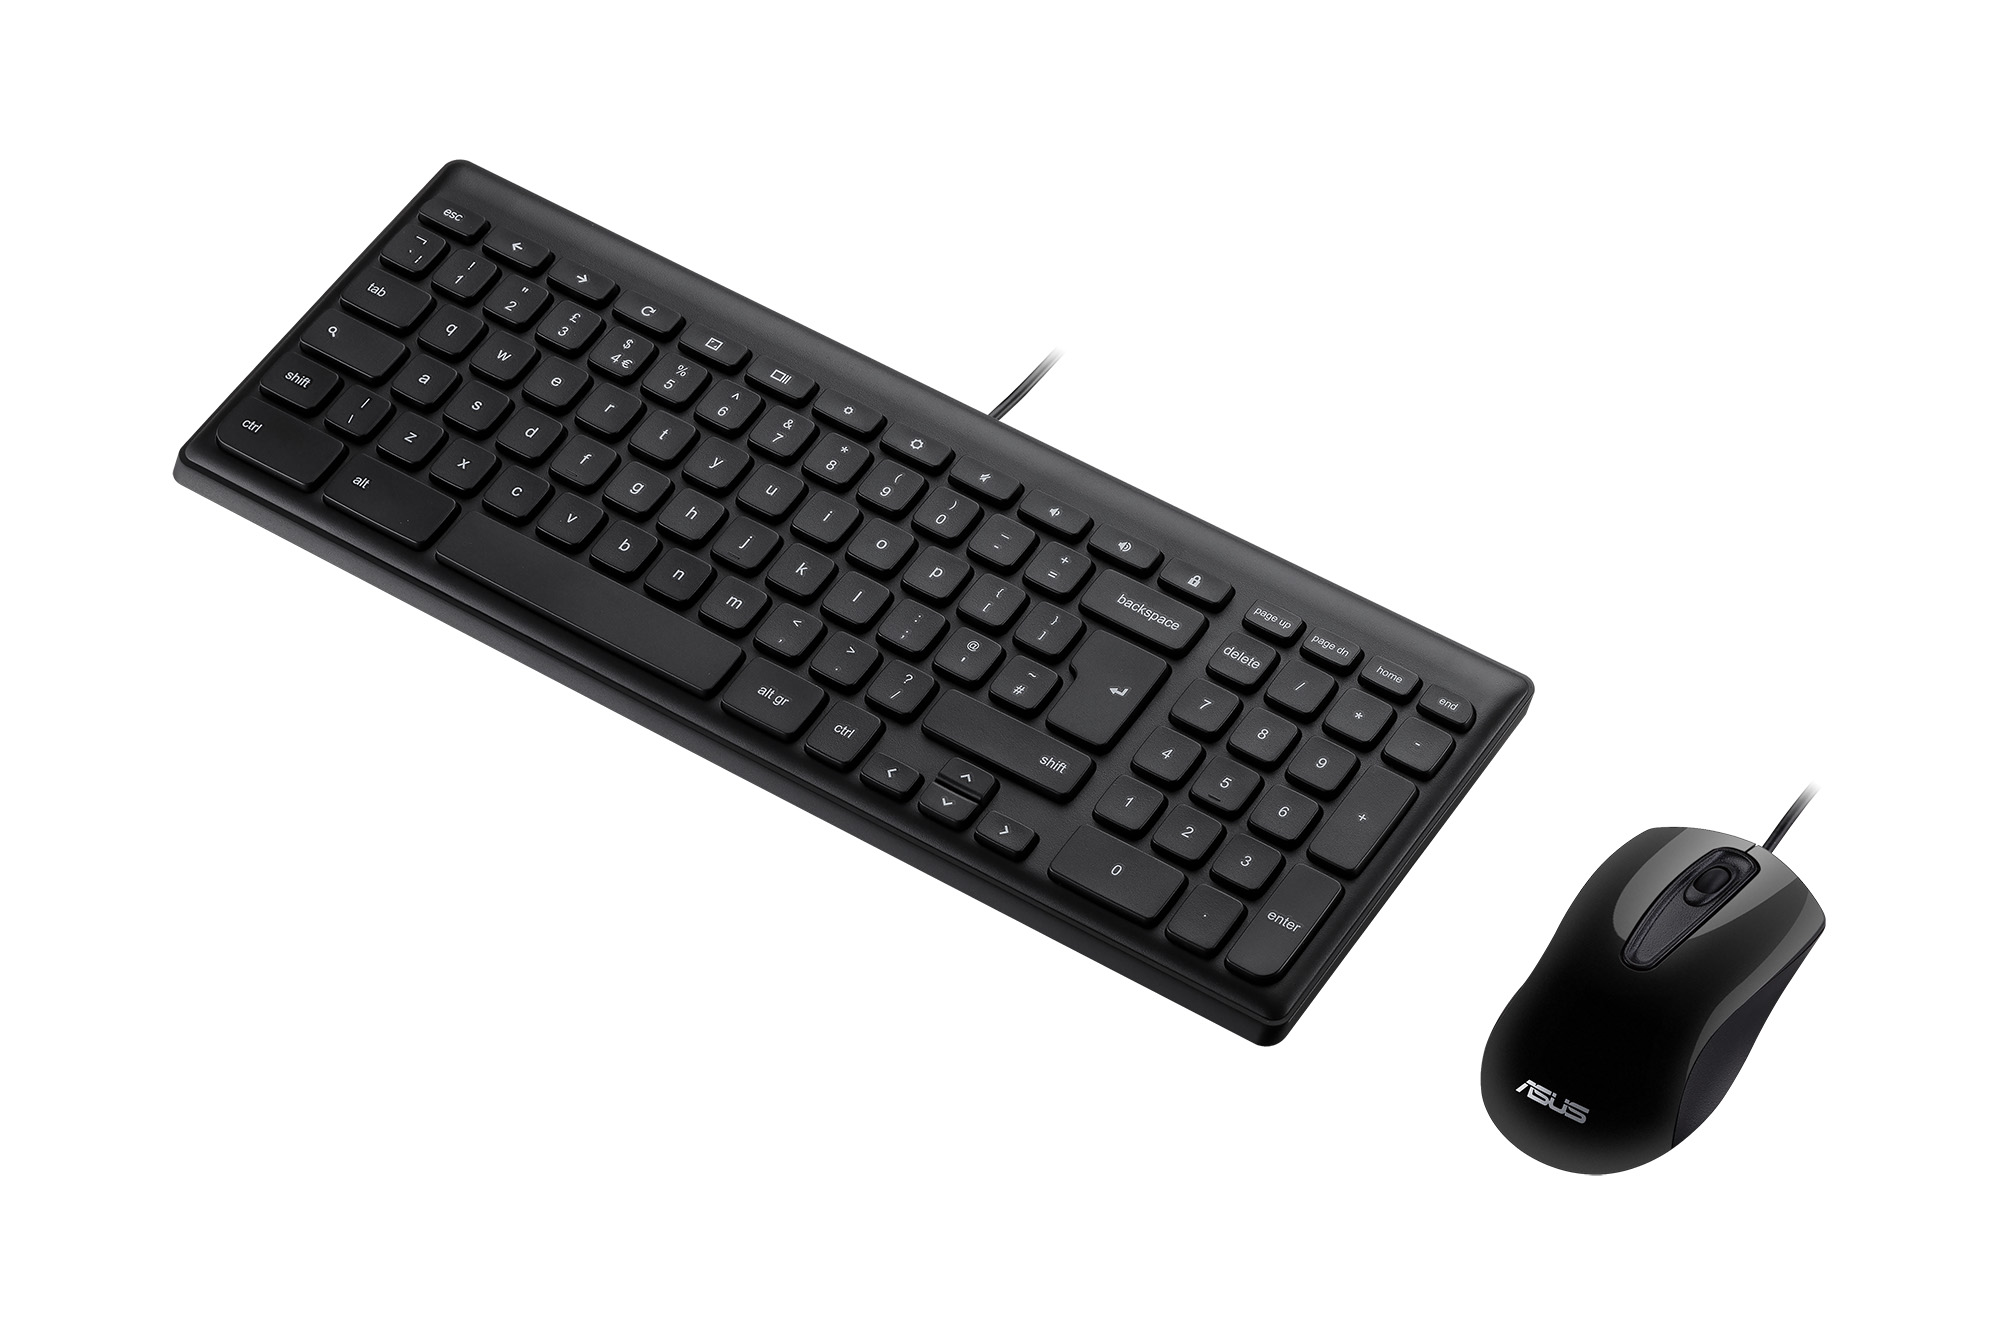 Keyboard & Mouse for Chrome OS